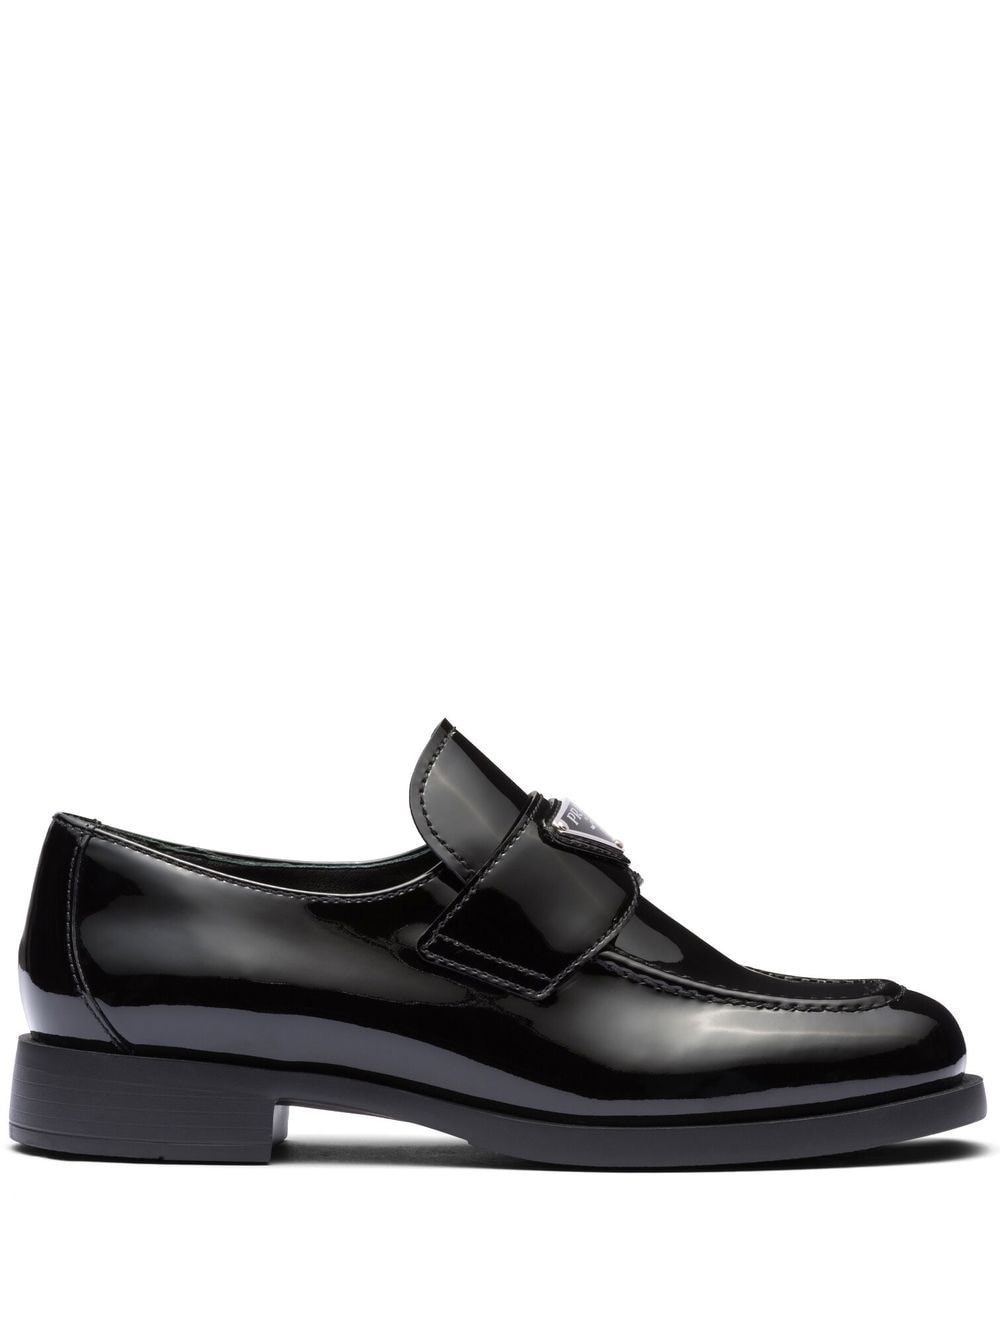 prada LOAFERS available on montiboutique.com - 54829